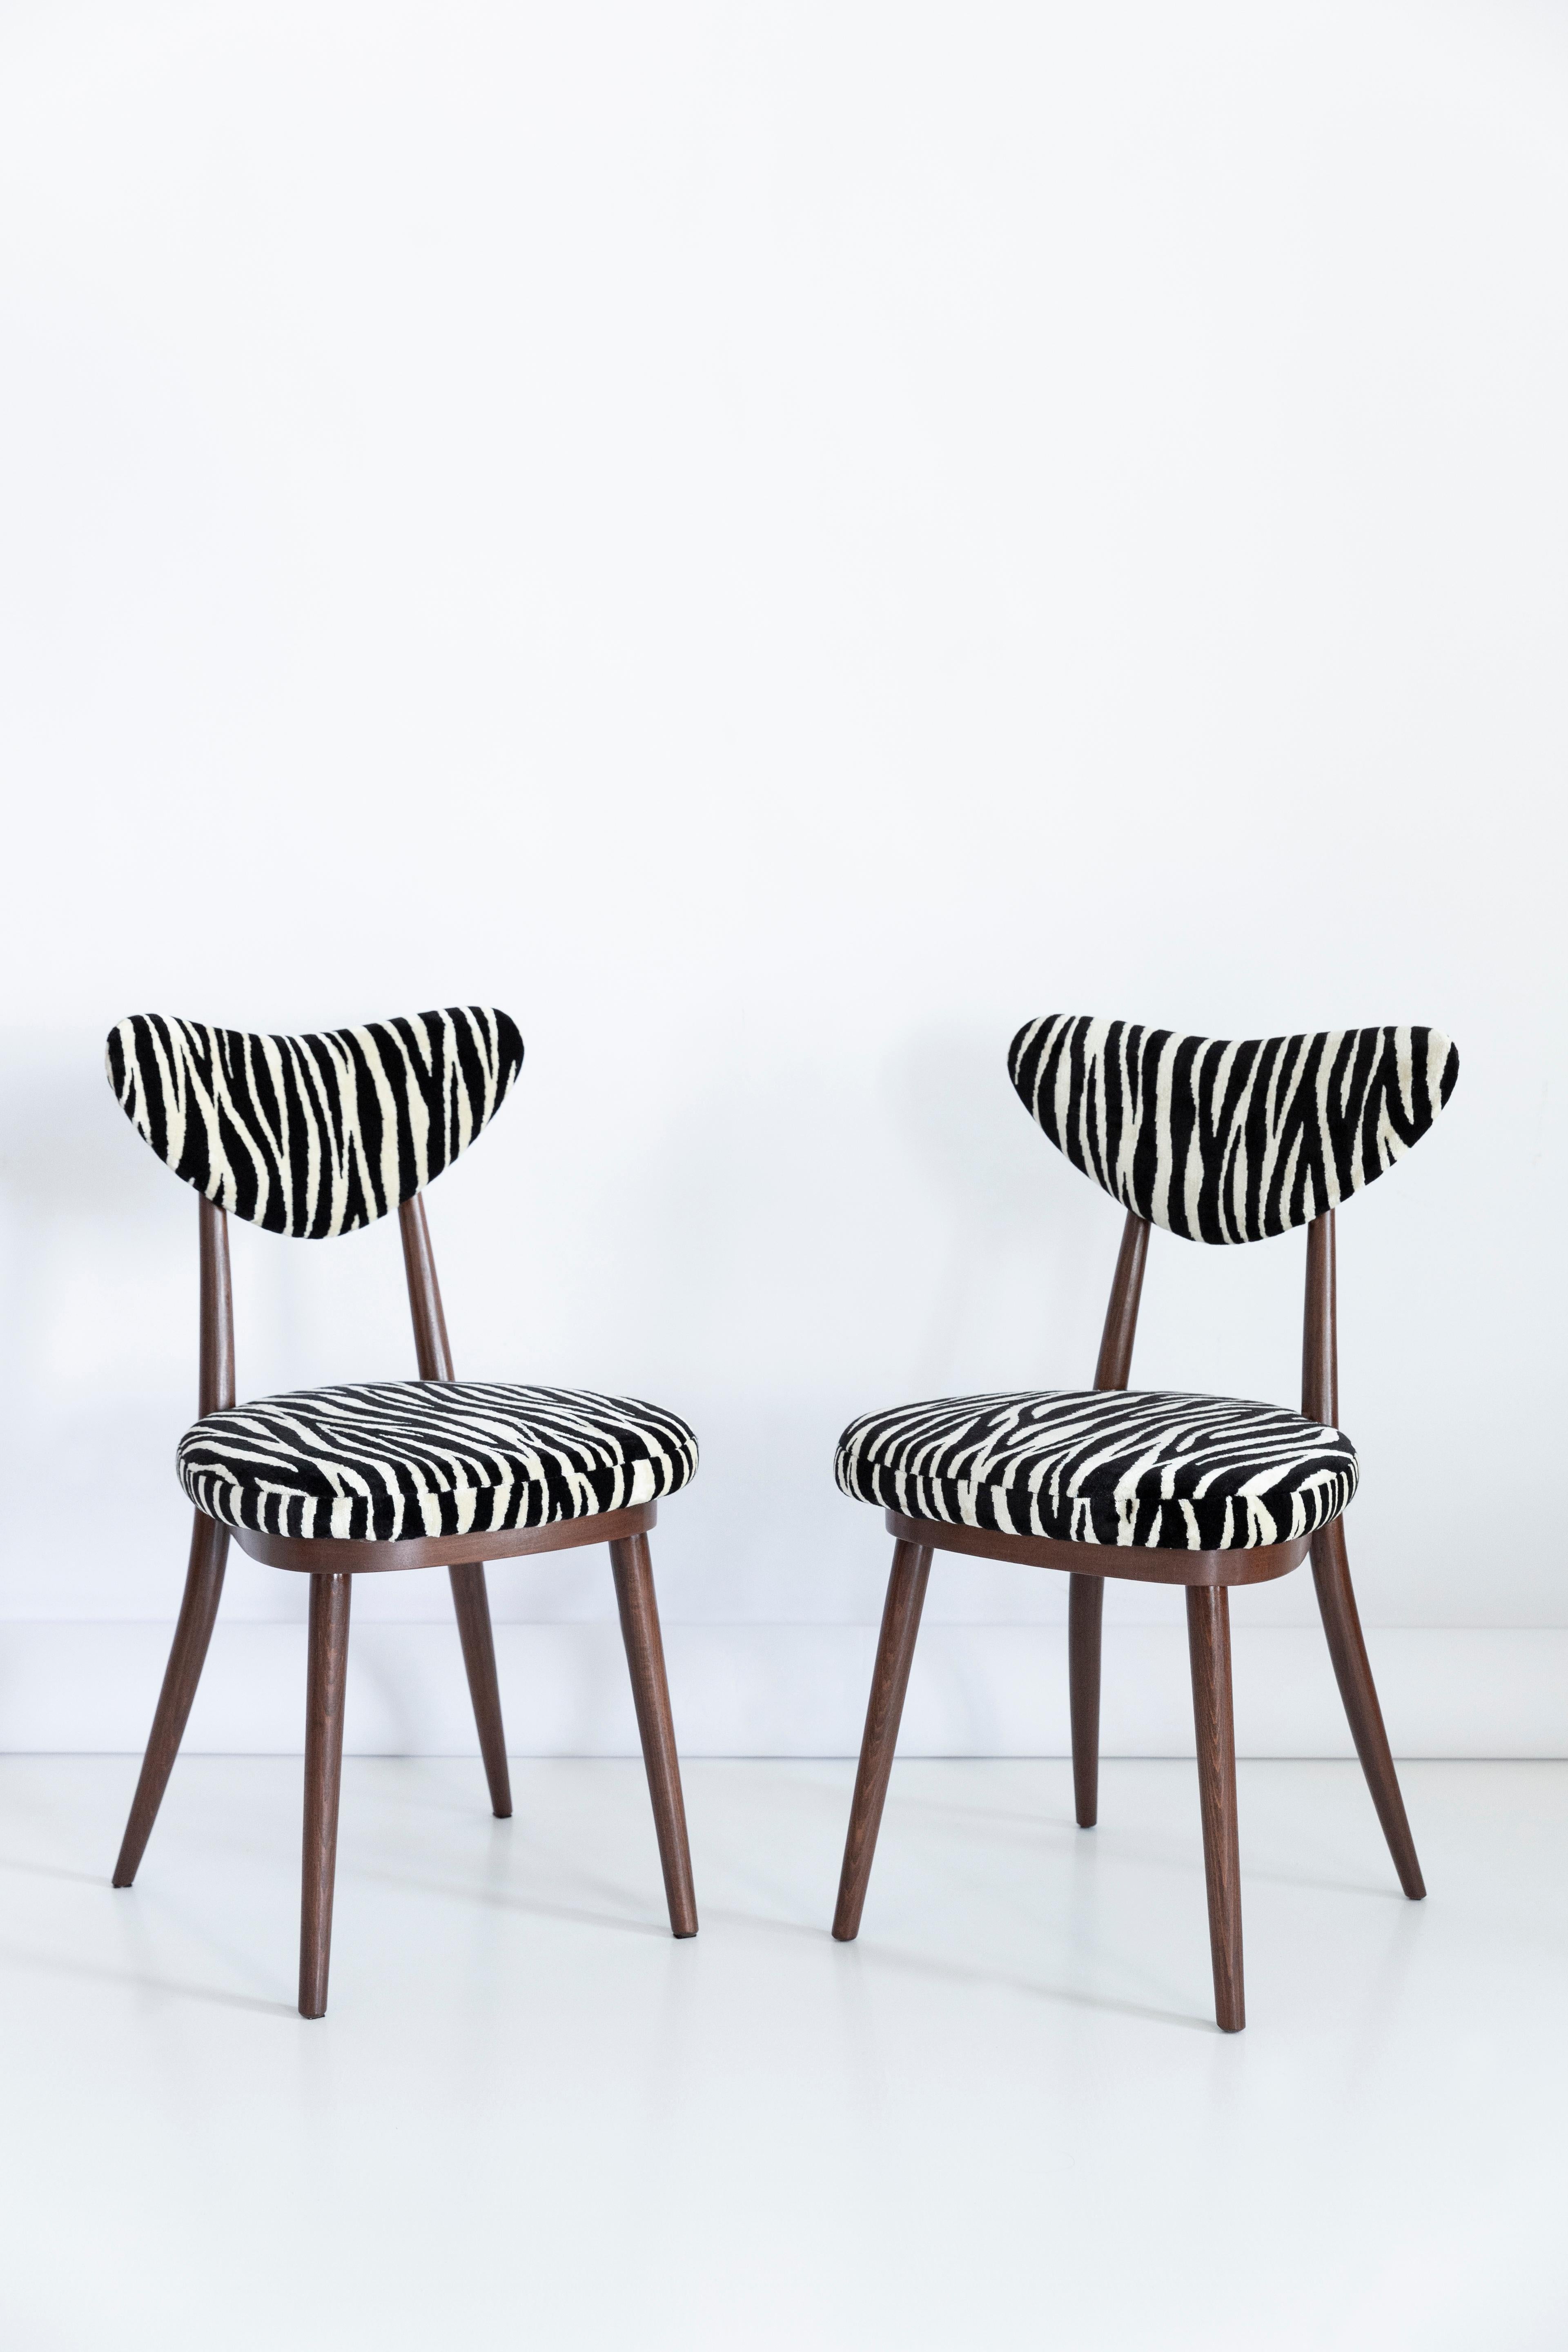 20th Century Six Midcentury Zebra Black White Heart Chairs, Hollywood Regency, Poland, 1960s For Sale